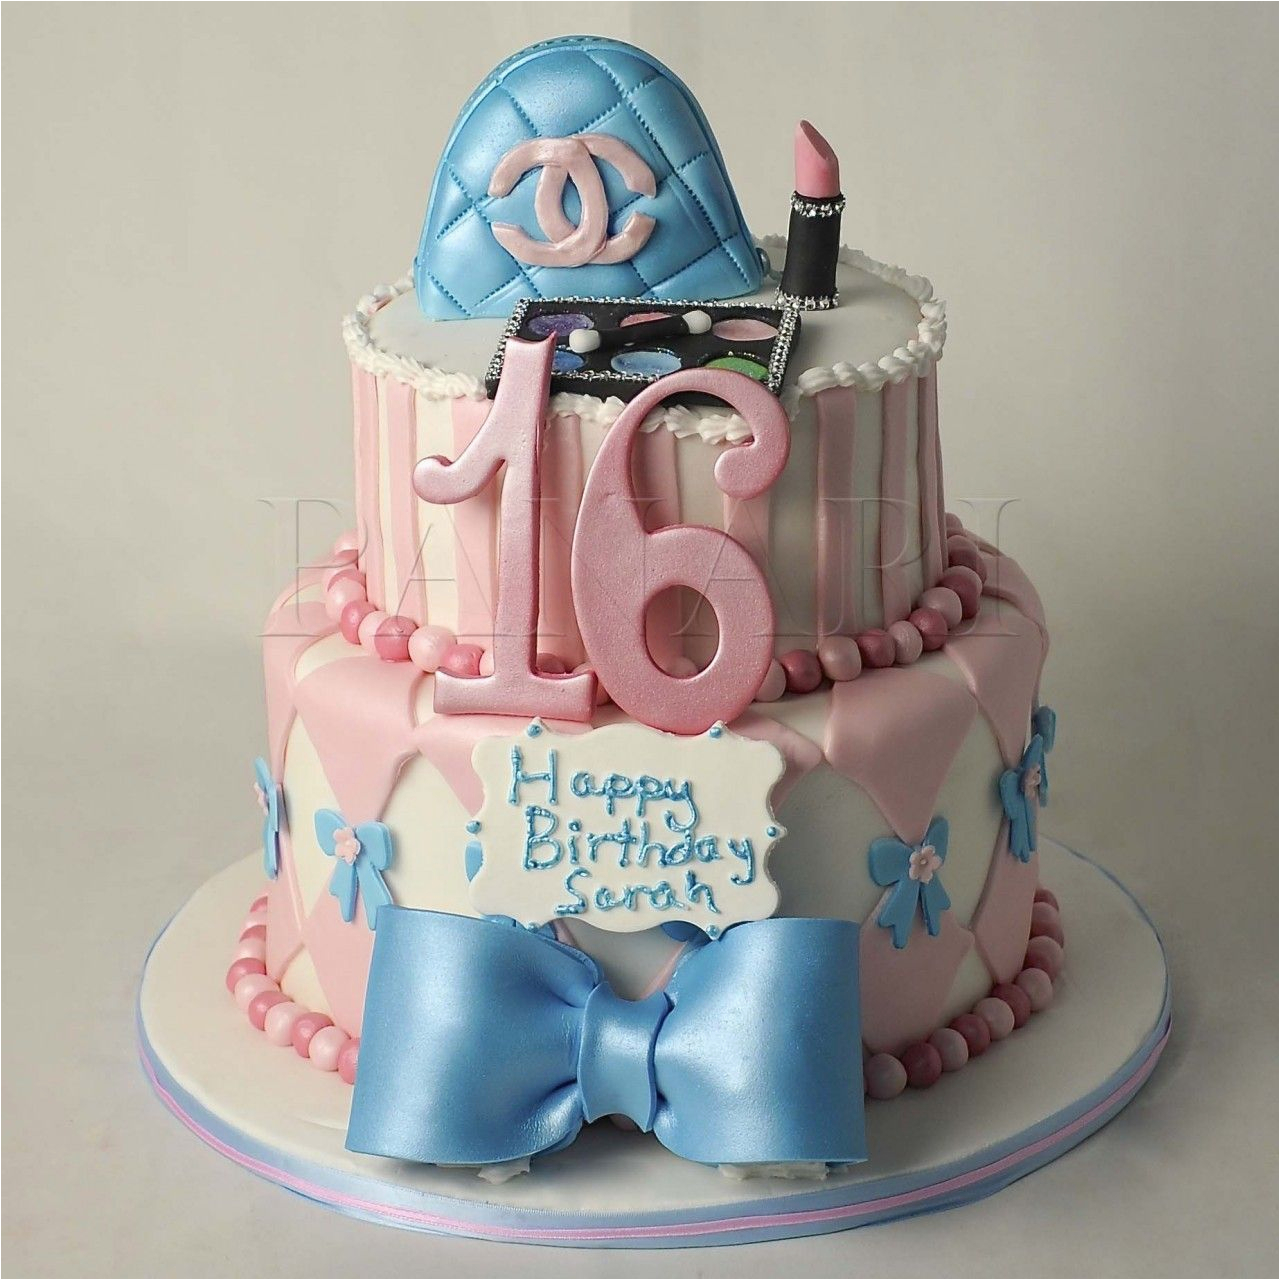 Cake for 16th Birthday Girl 16th Birthday Cakes Http Birthday Cake Pictures Com top